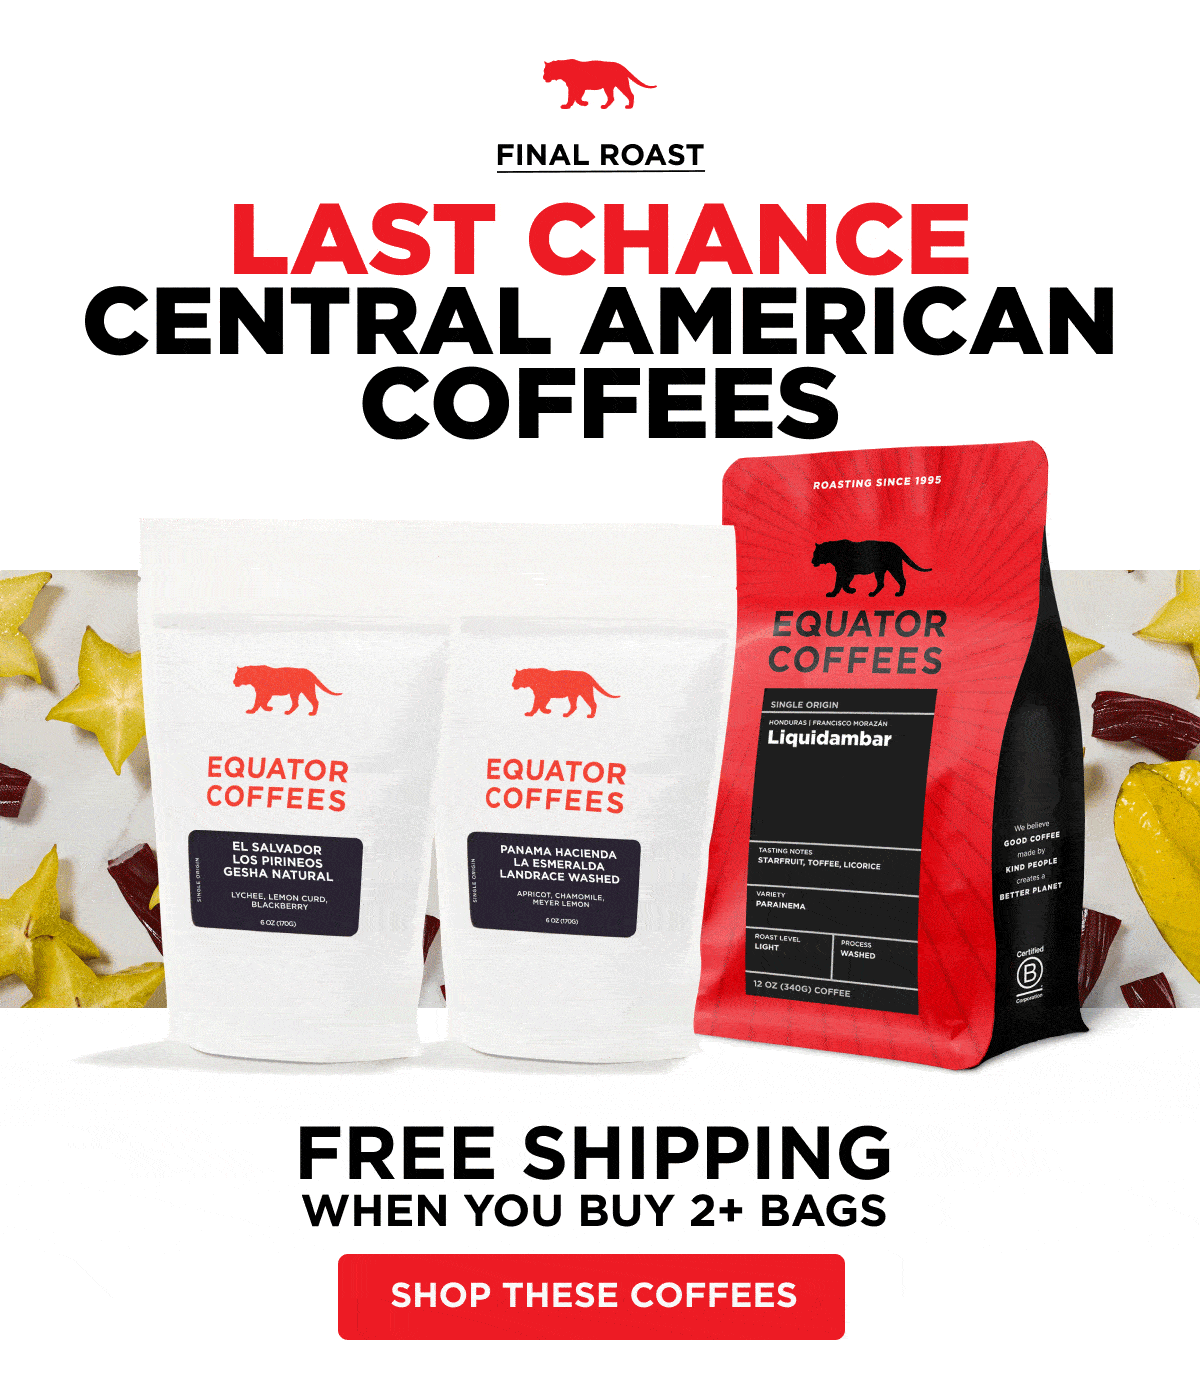 Final Roast: Three Last Chance Central American Coffees